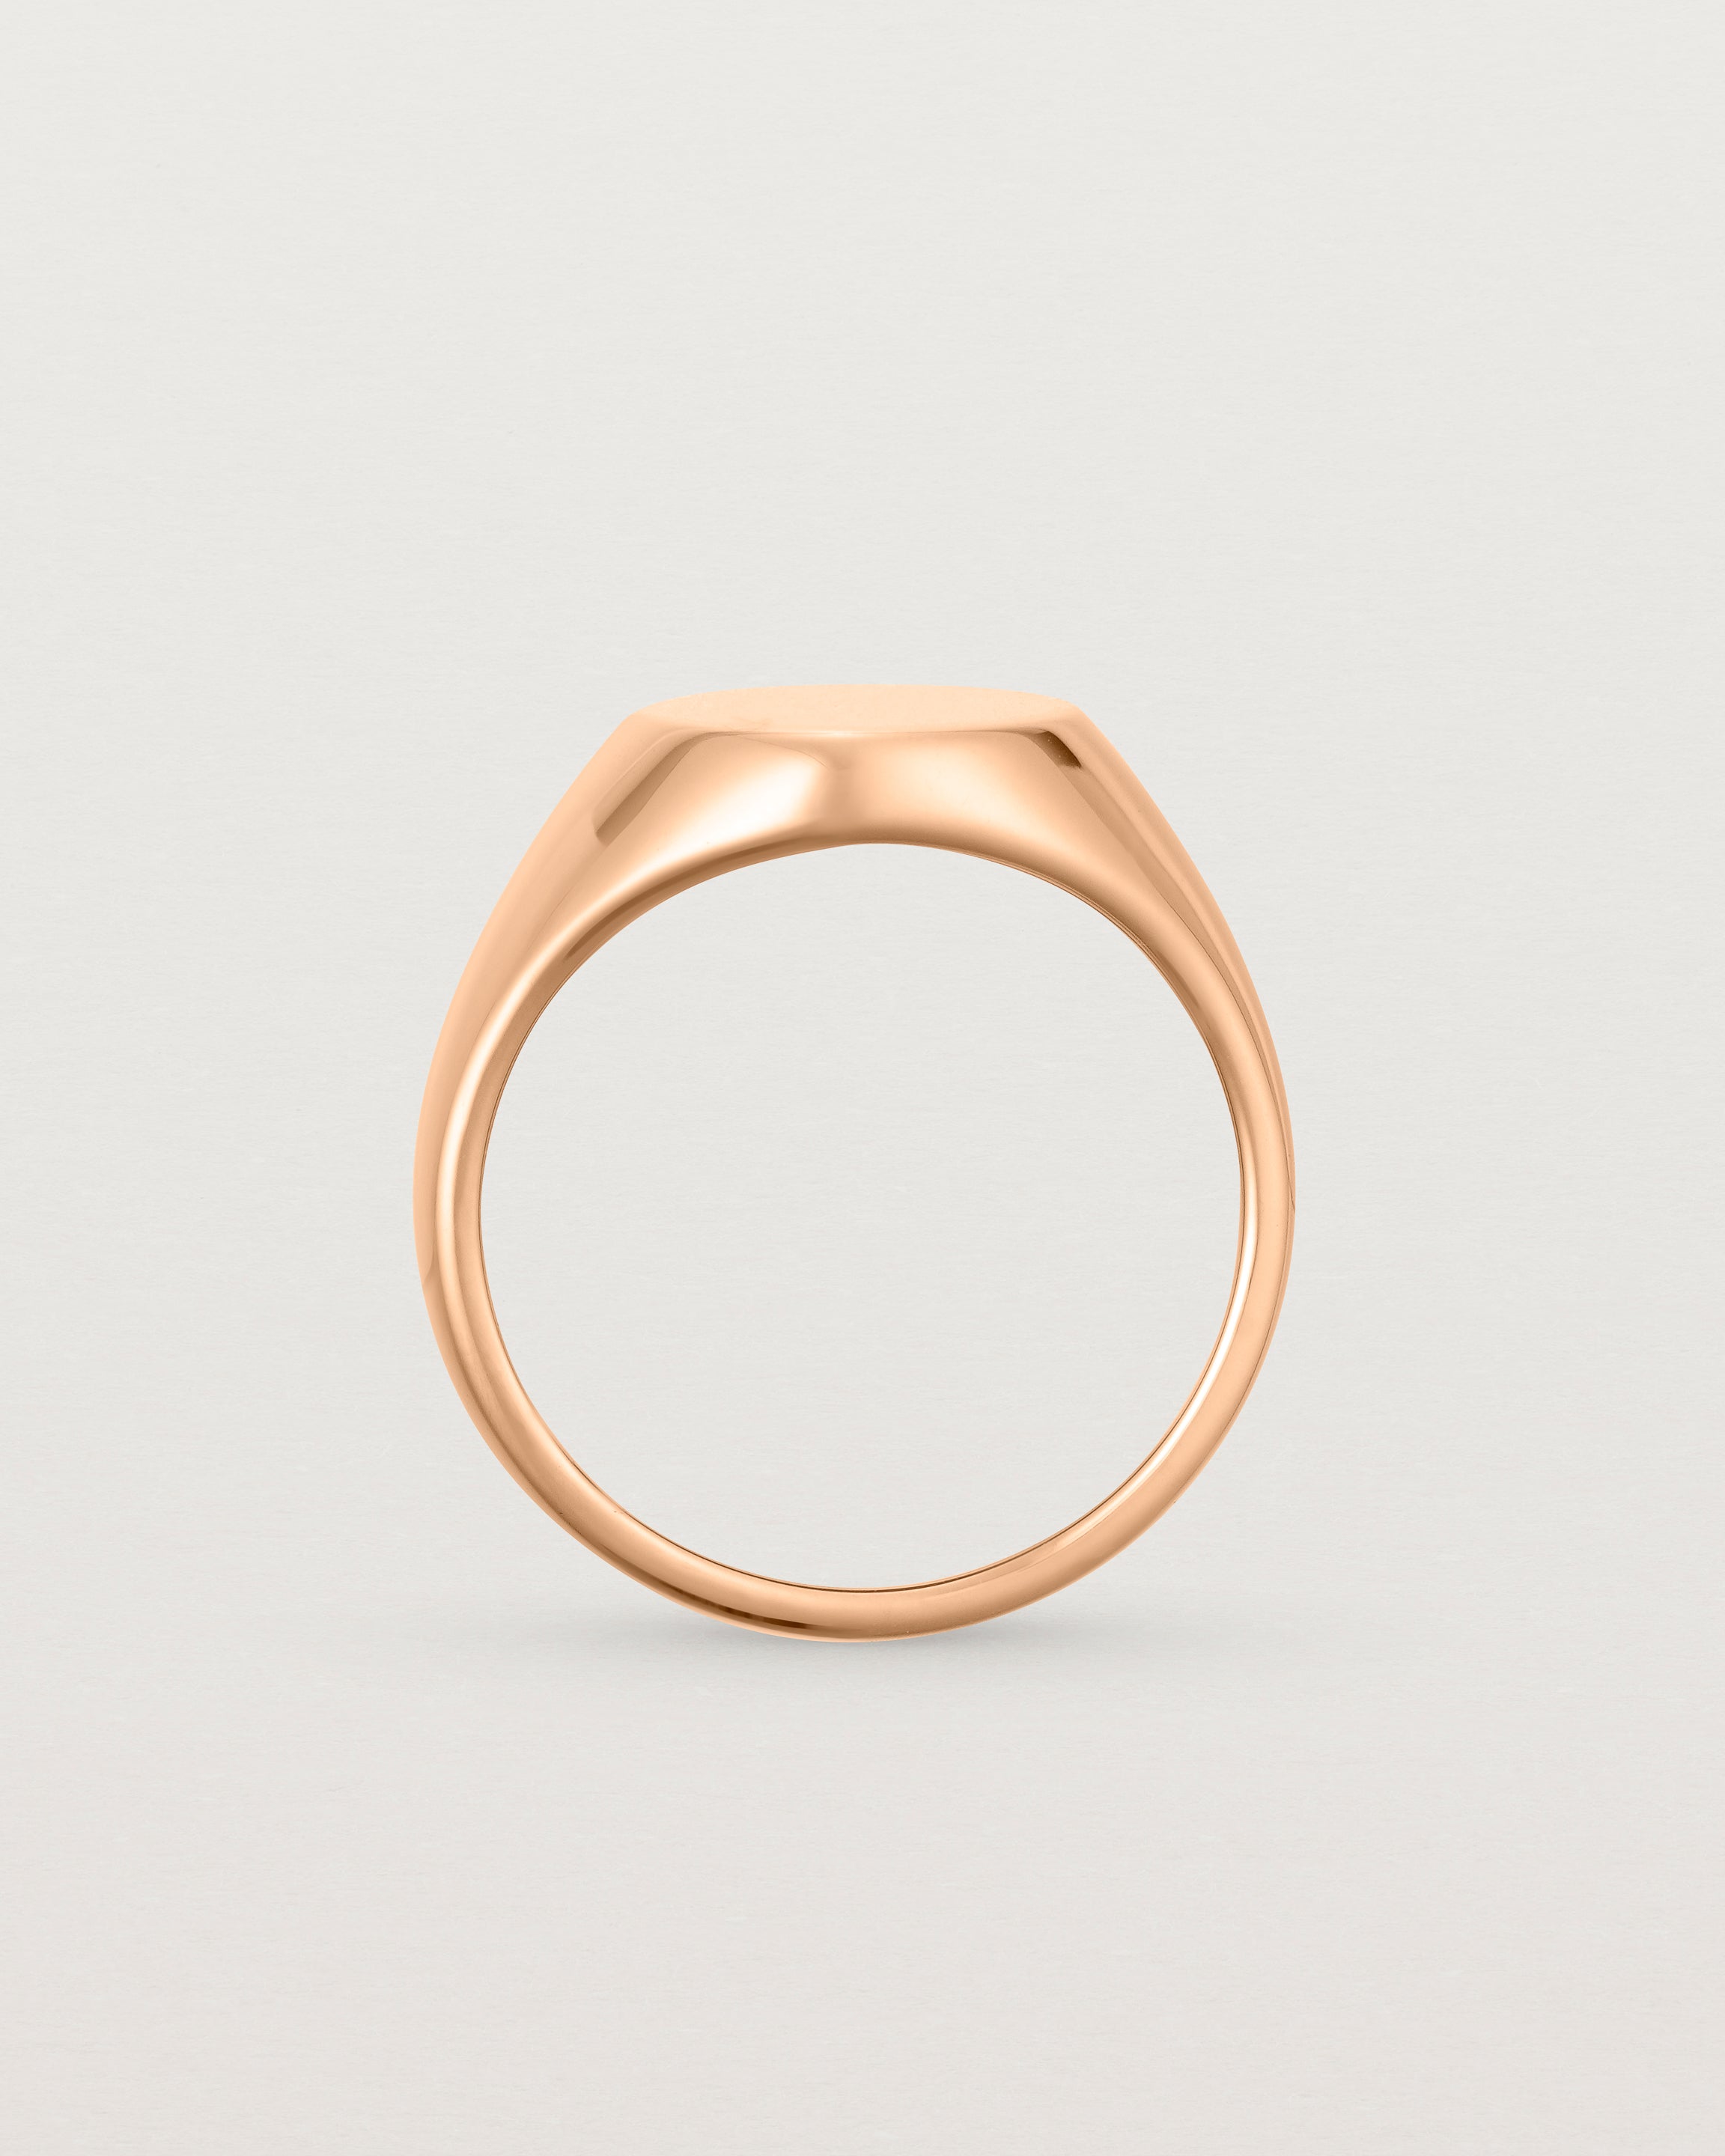 Standing view of the Kian Signet Ring | Rose Gold.